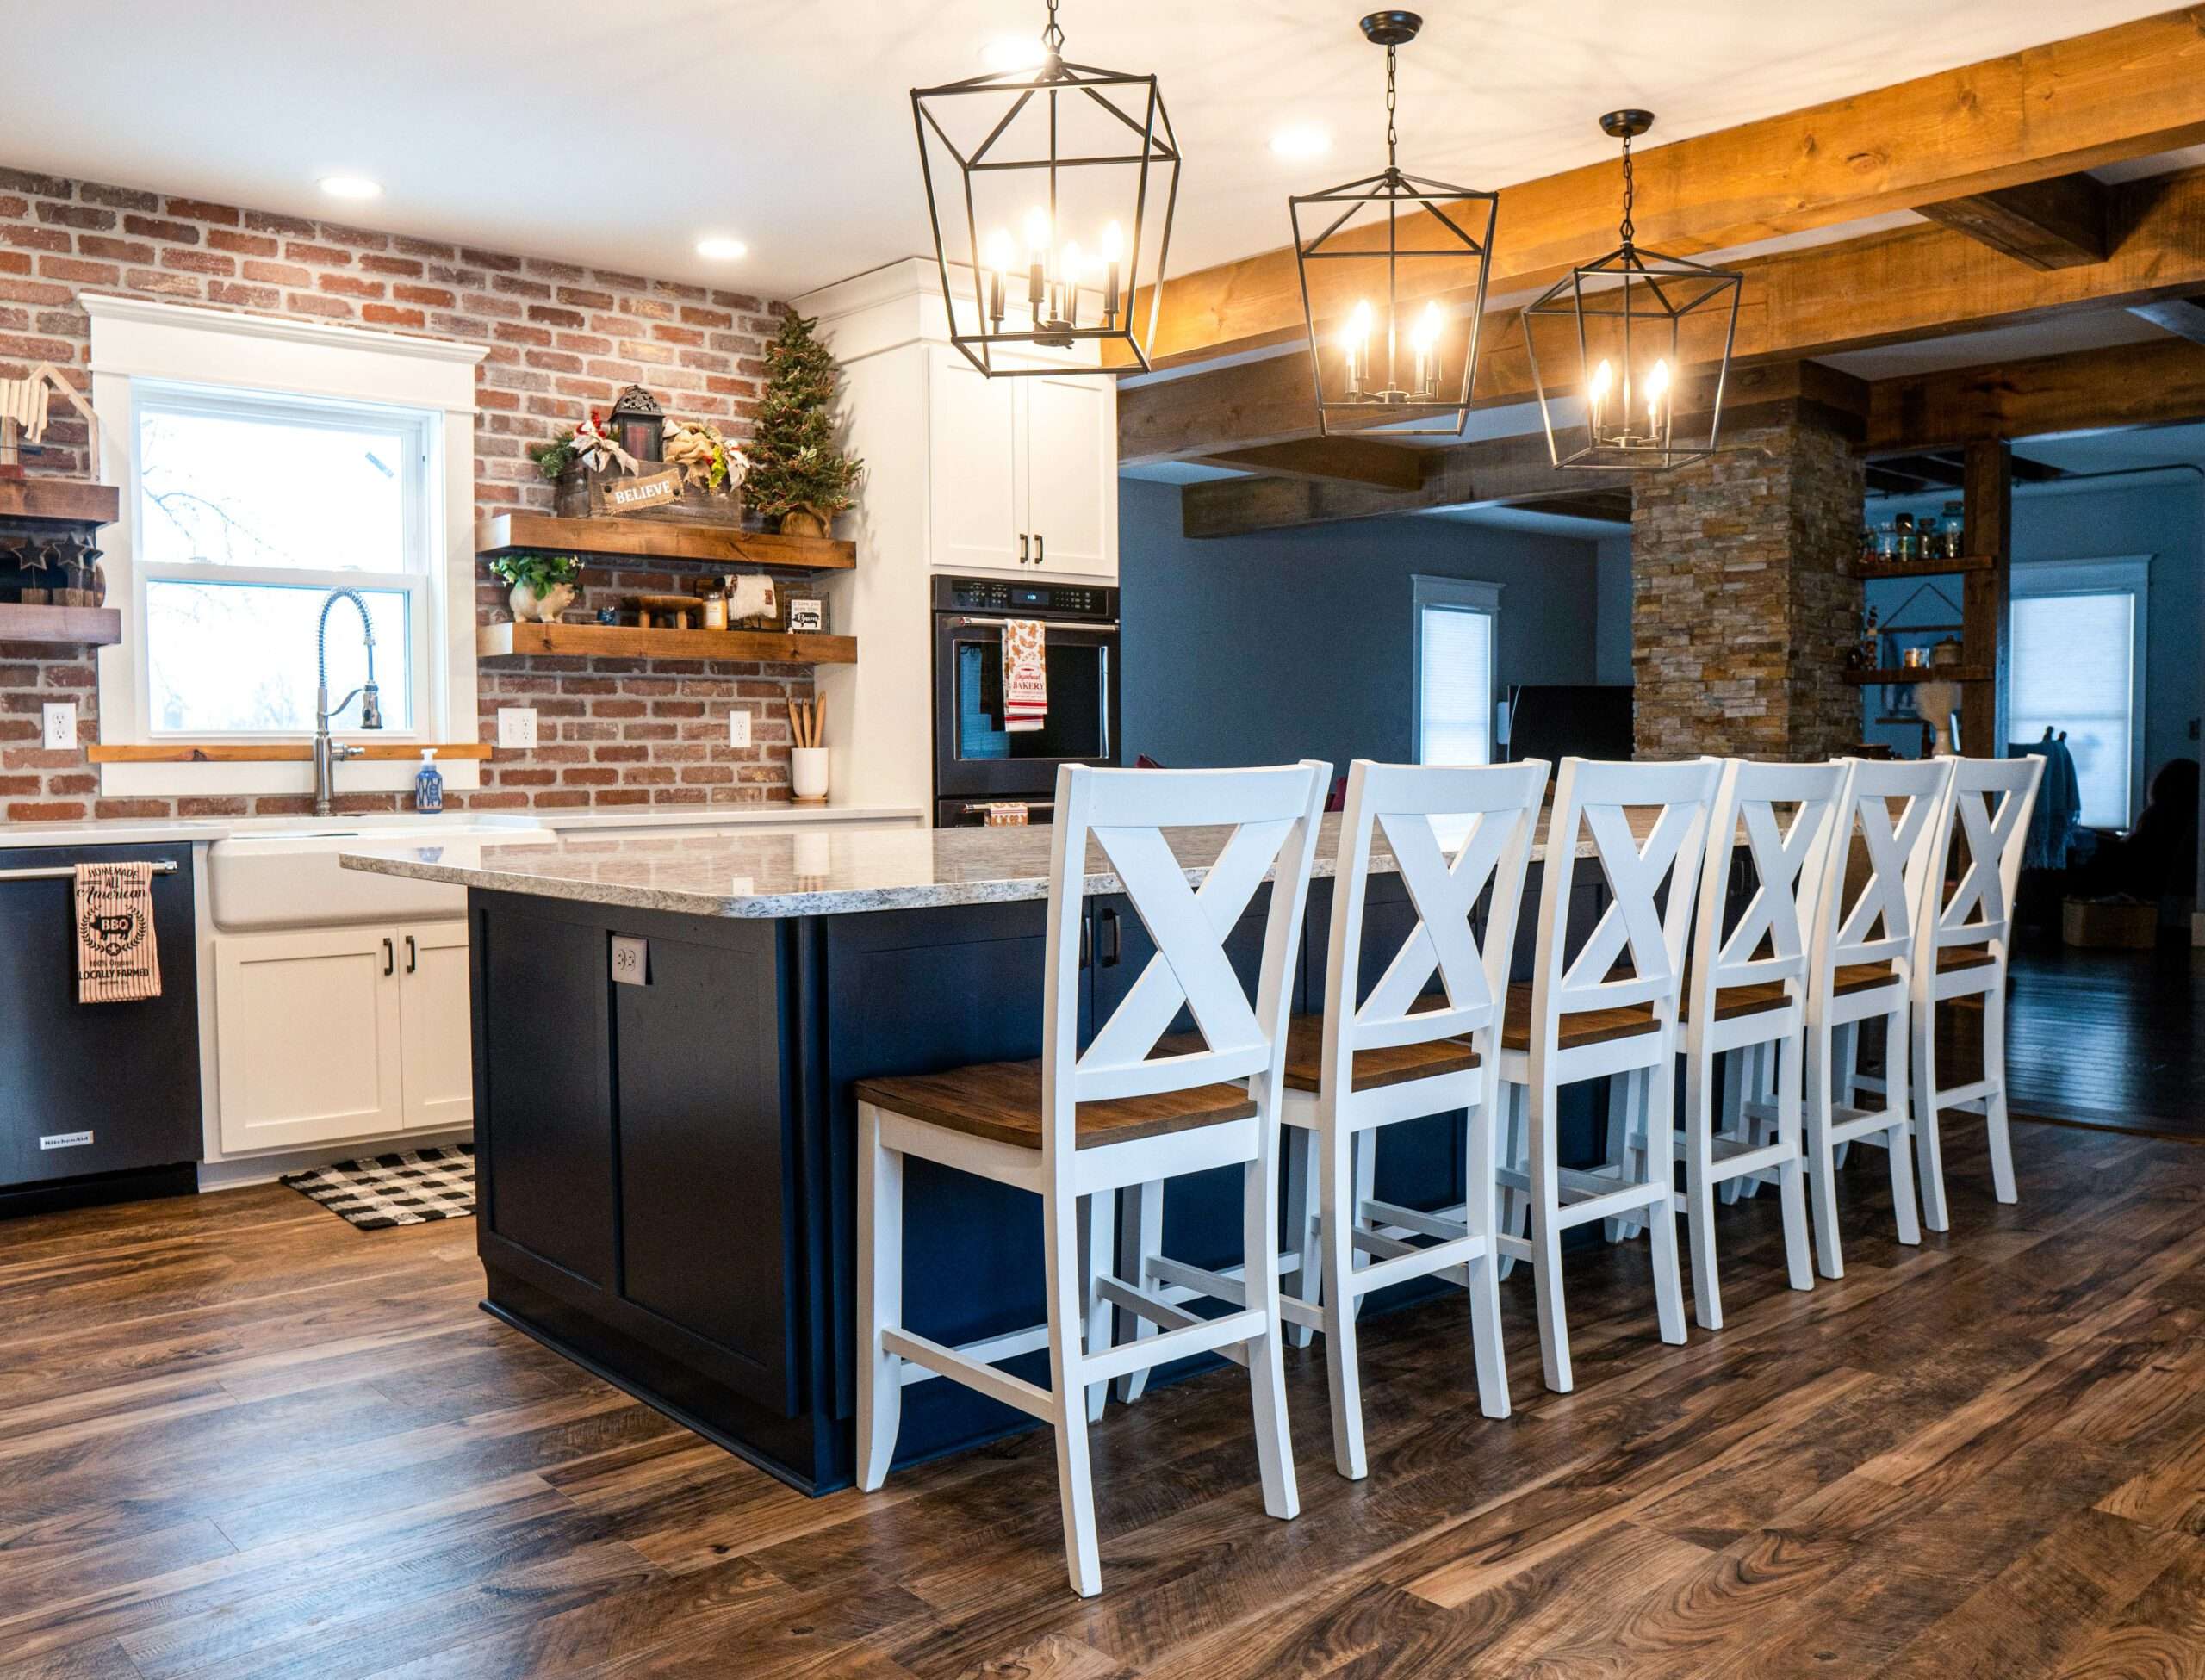 Popular Rustic Kitchen Design Styles Explained